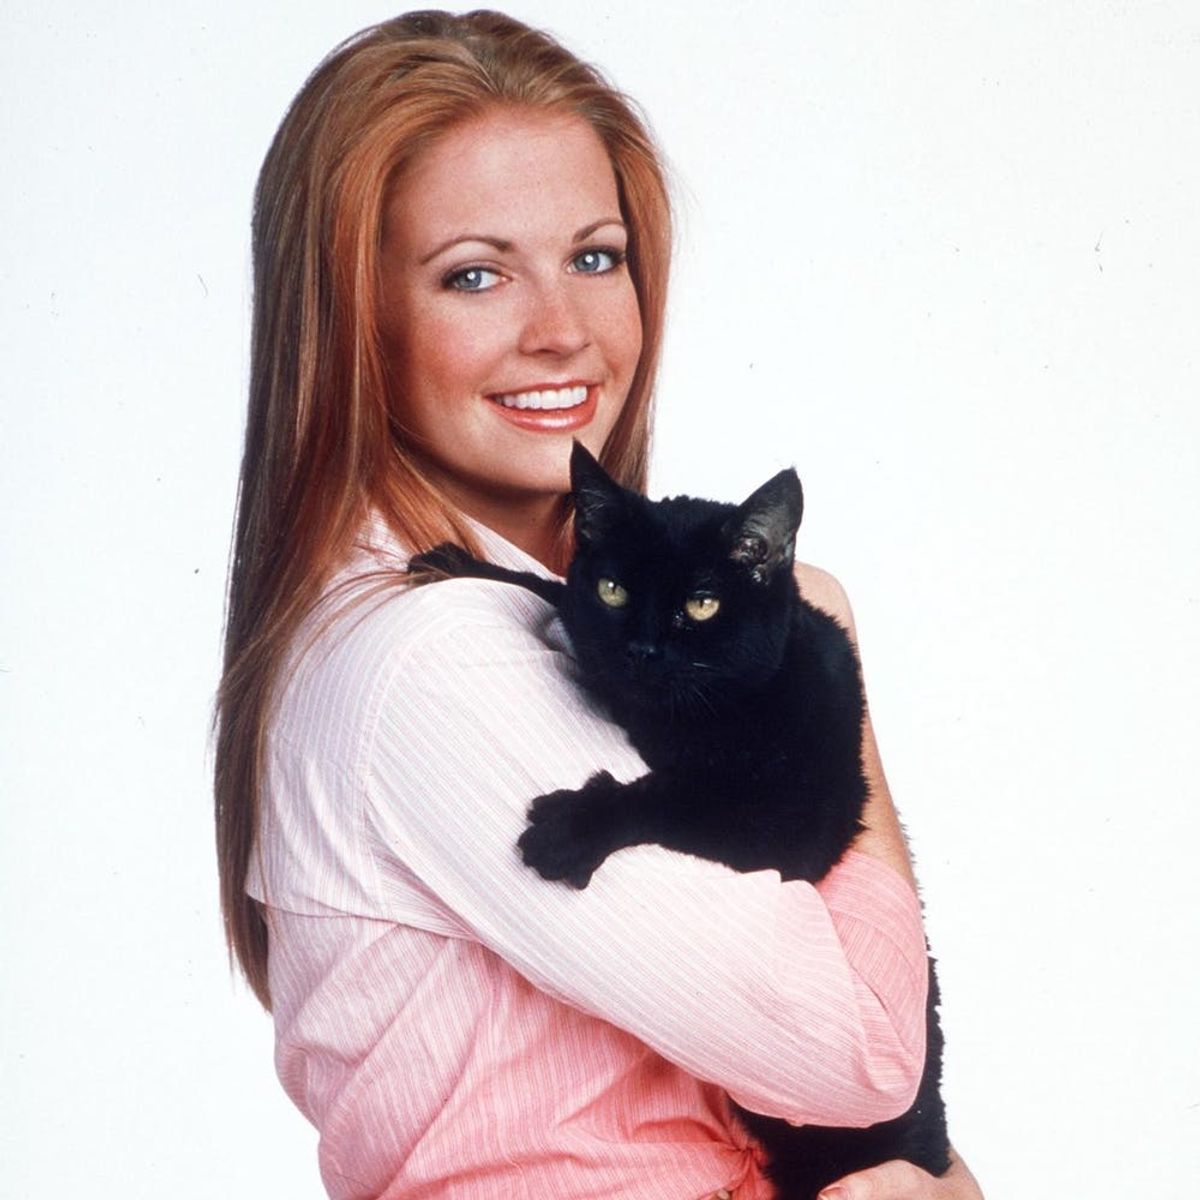 A New Show About Sabrina the Teenage Witch Is in the Works — But It Won’t Be Anything Like the ’90s Version